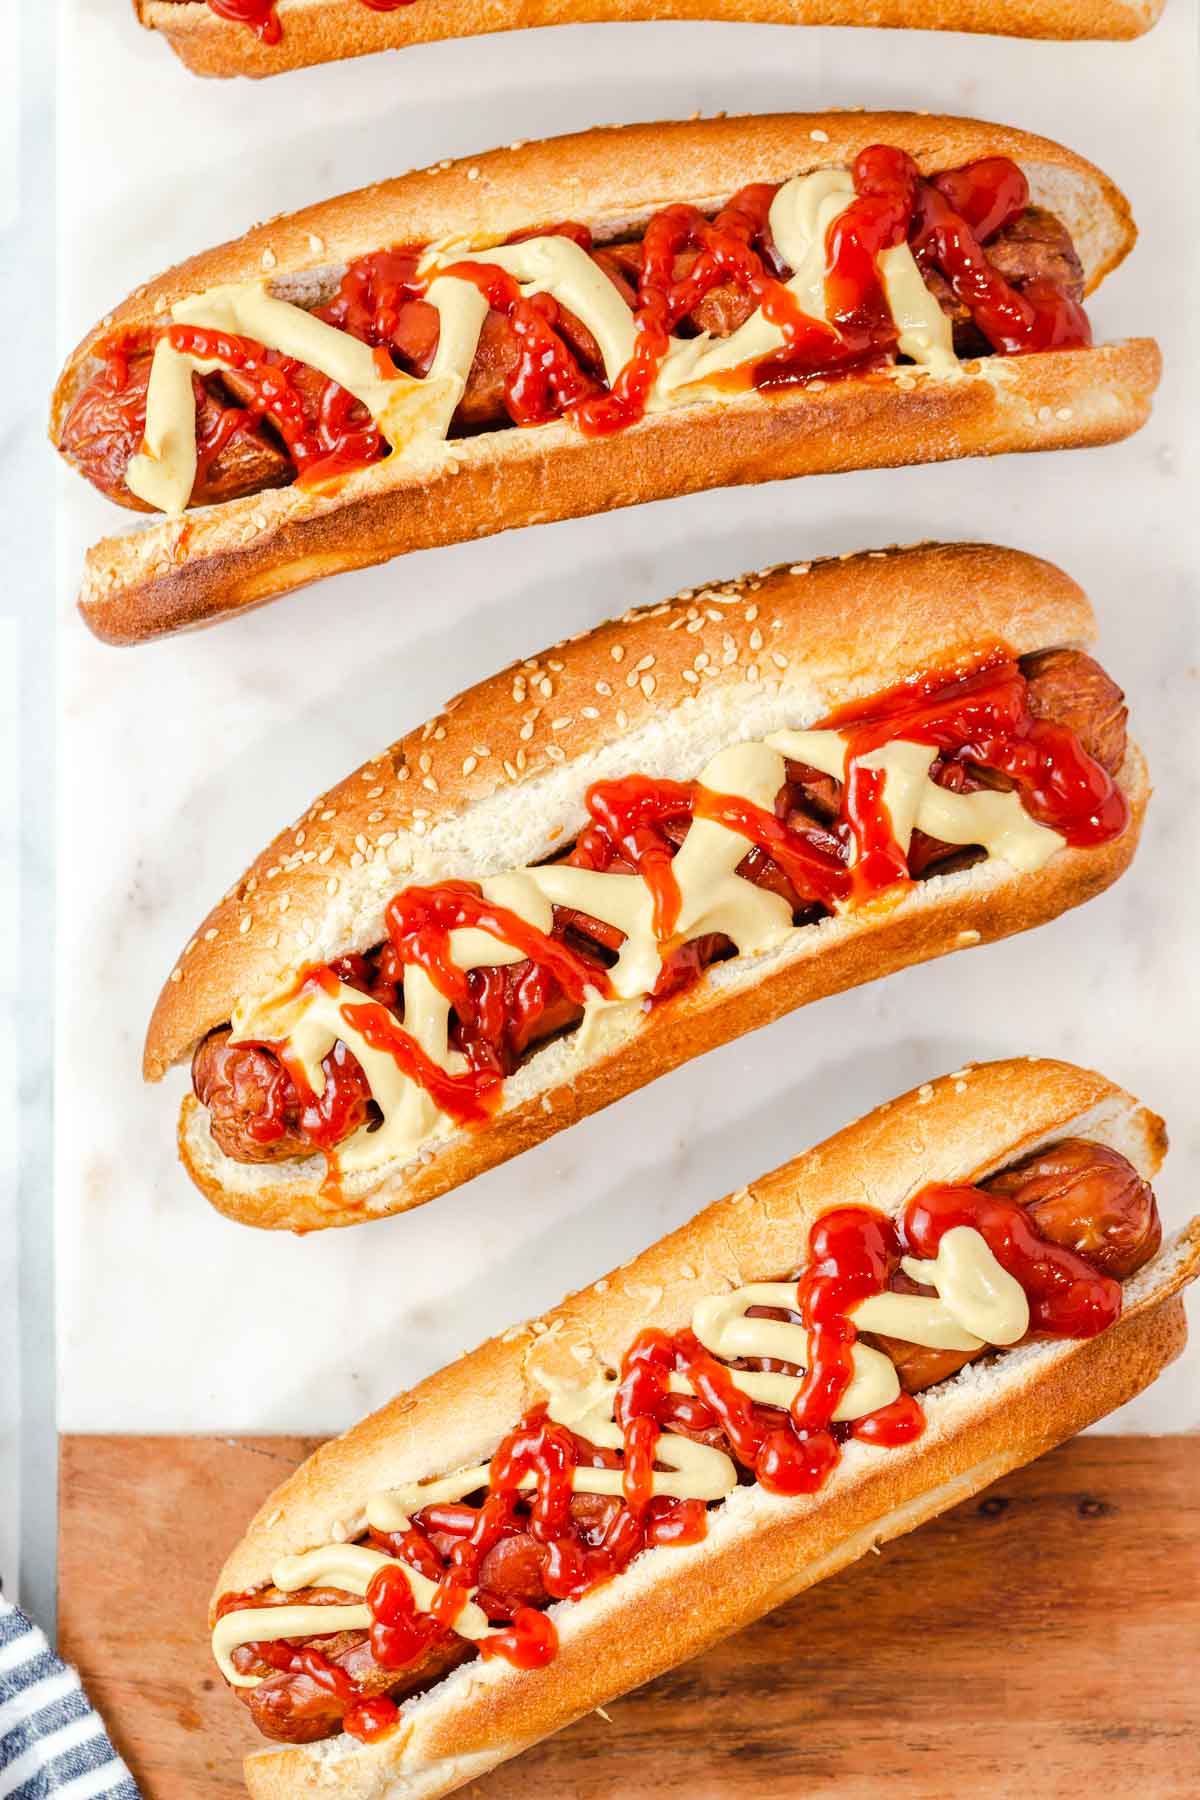 air fryer hot dogs with mustard and ketchup.